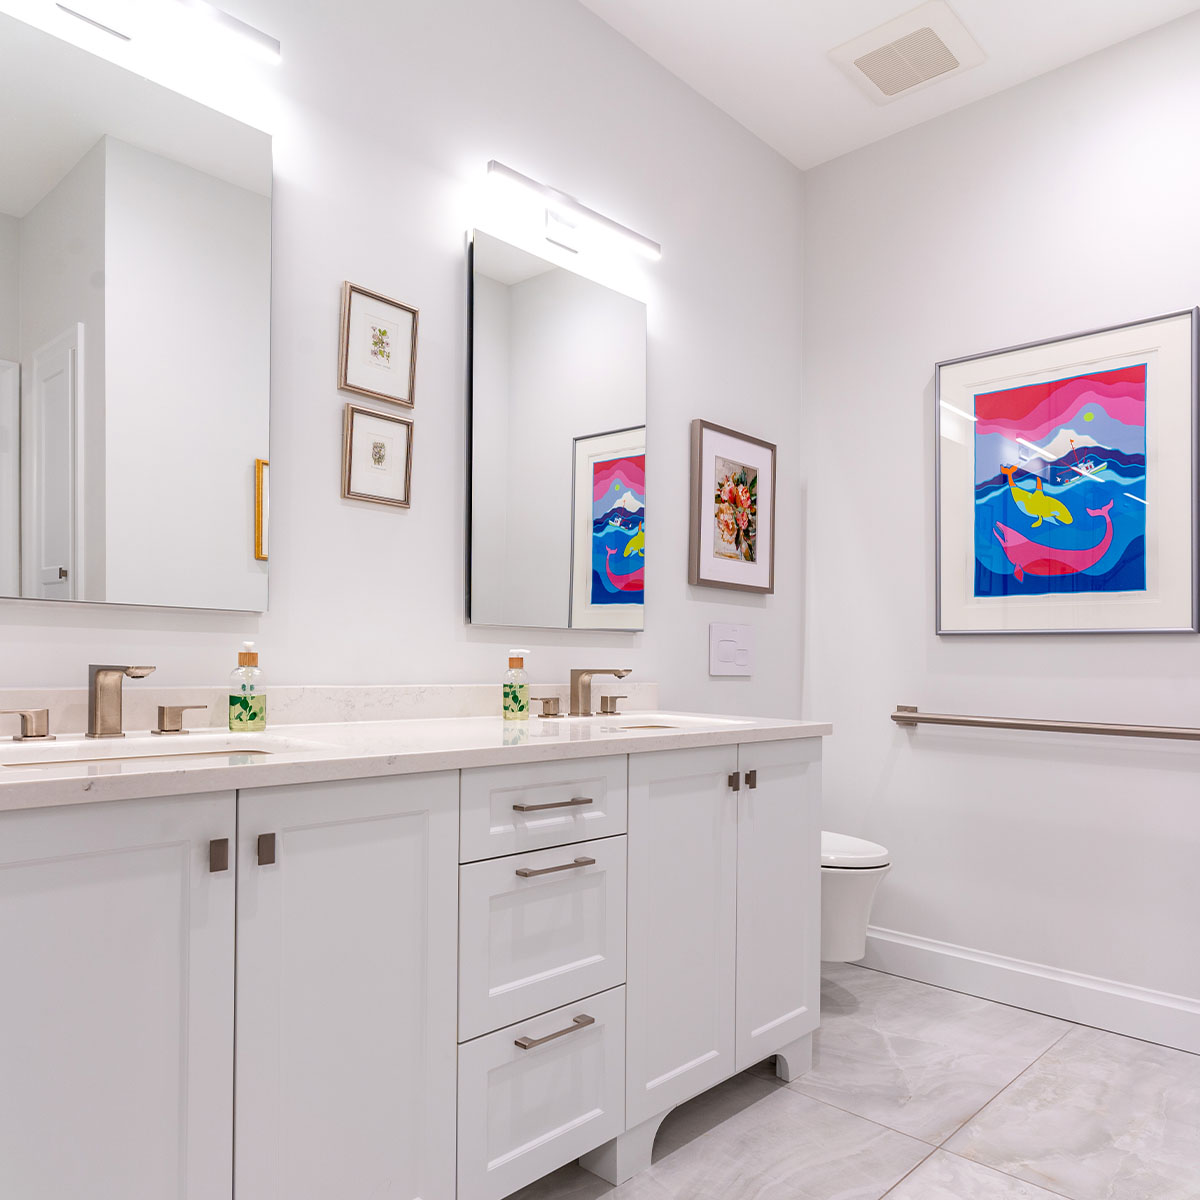 Colorful painting in a bathroom with a large mirror, creating a vibrant space.